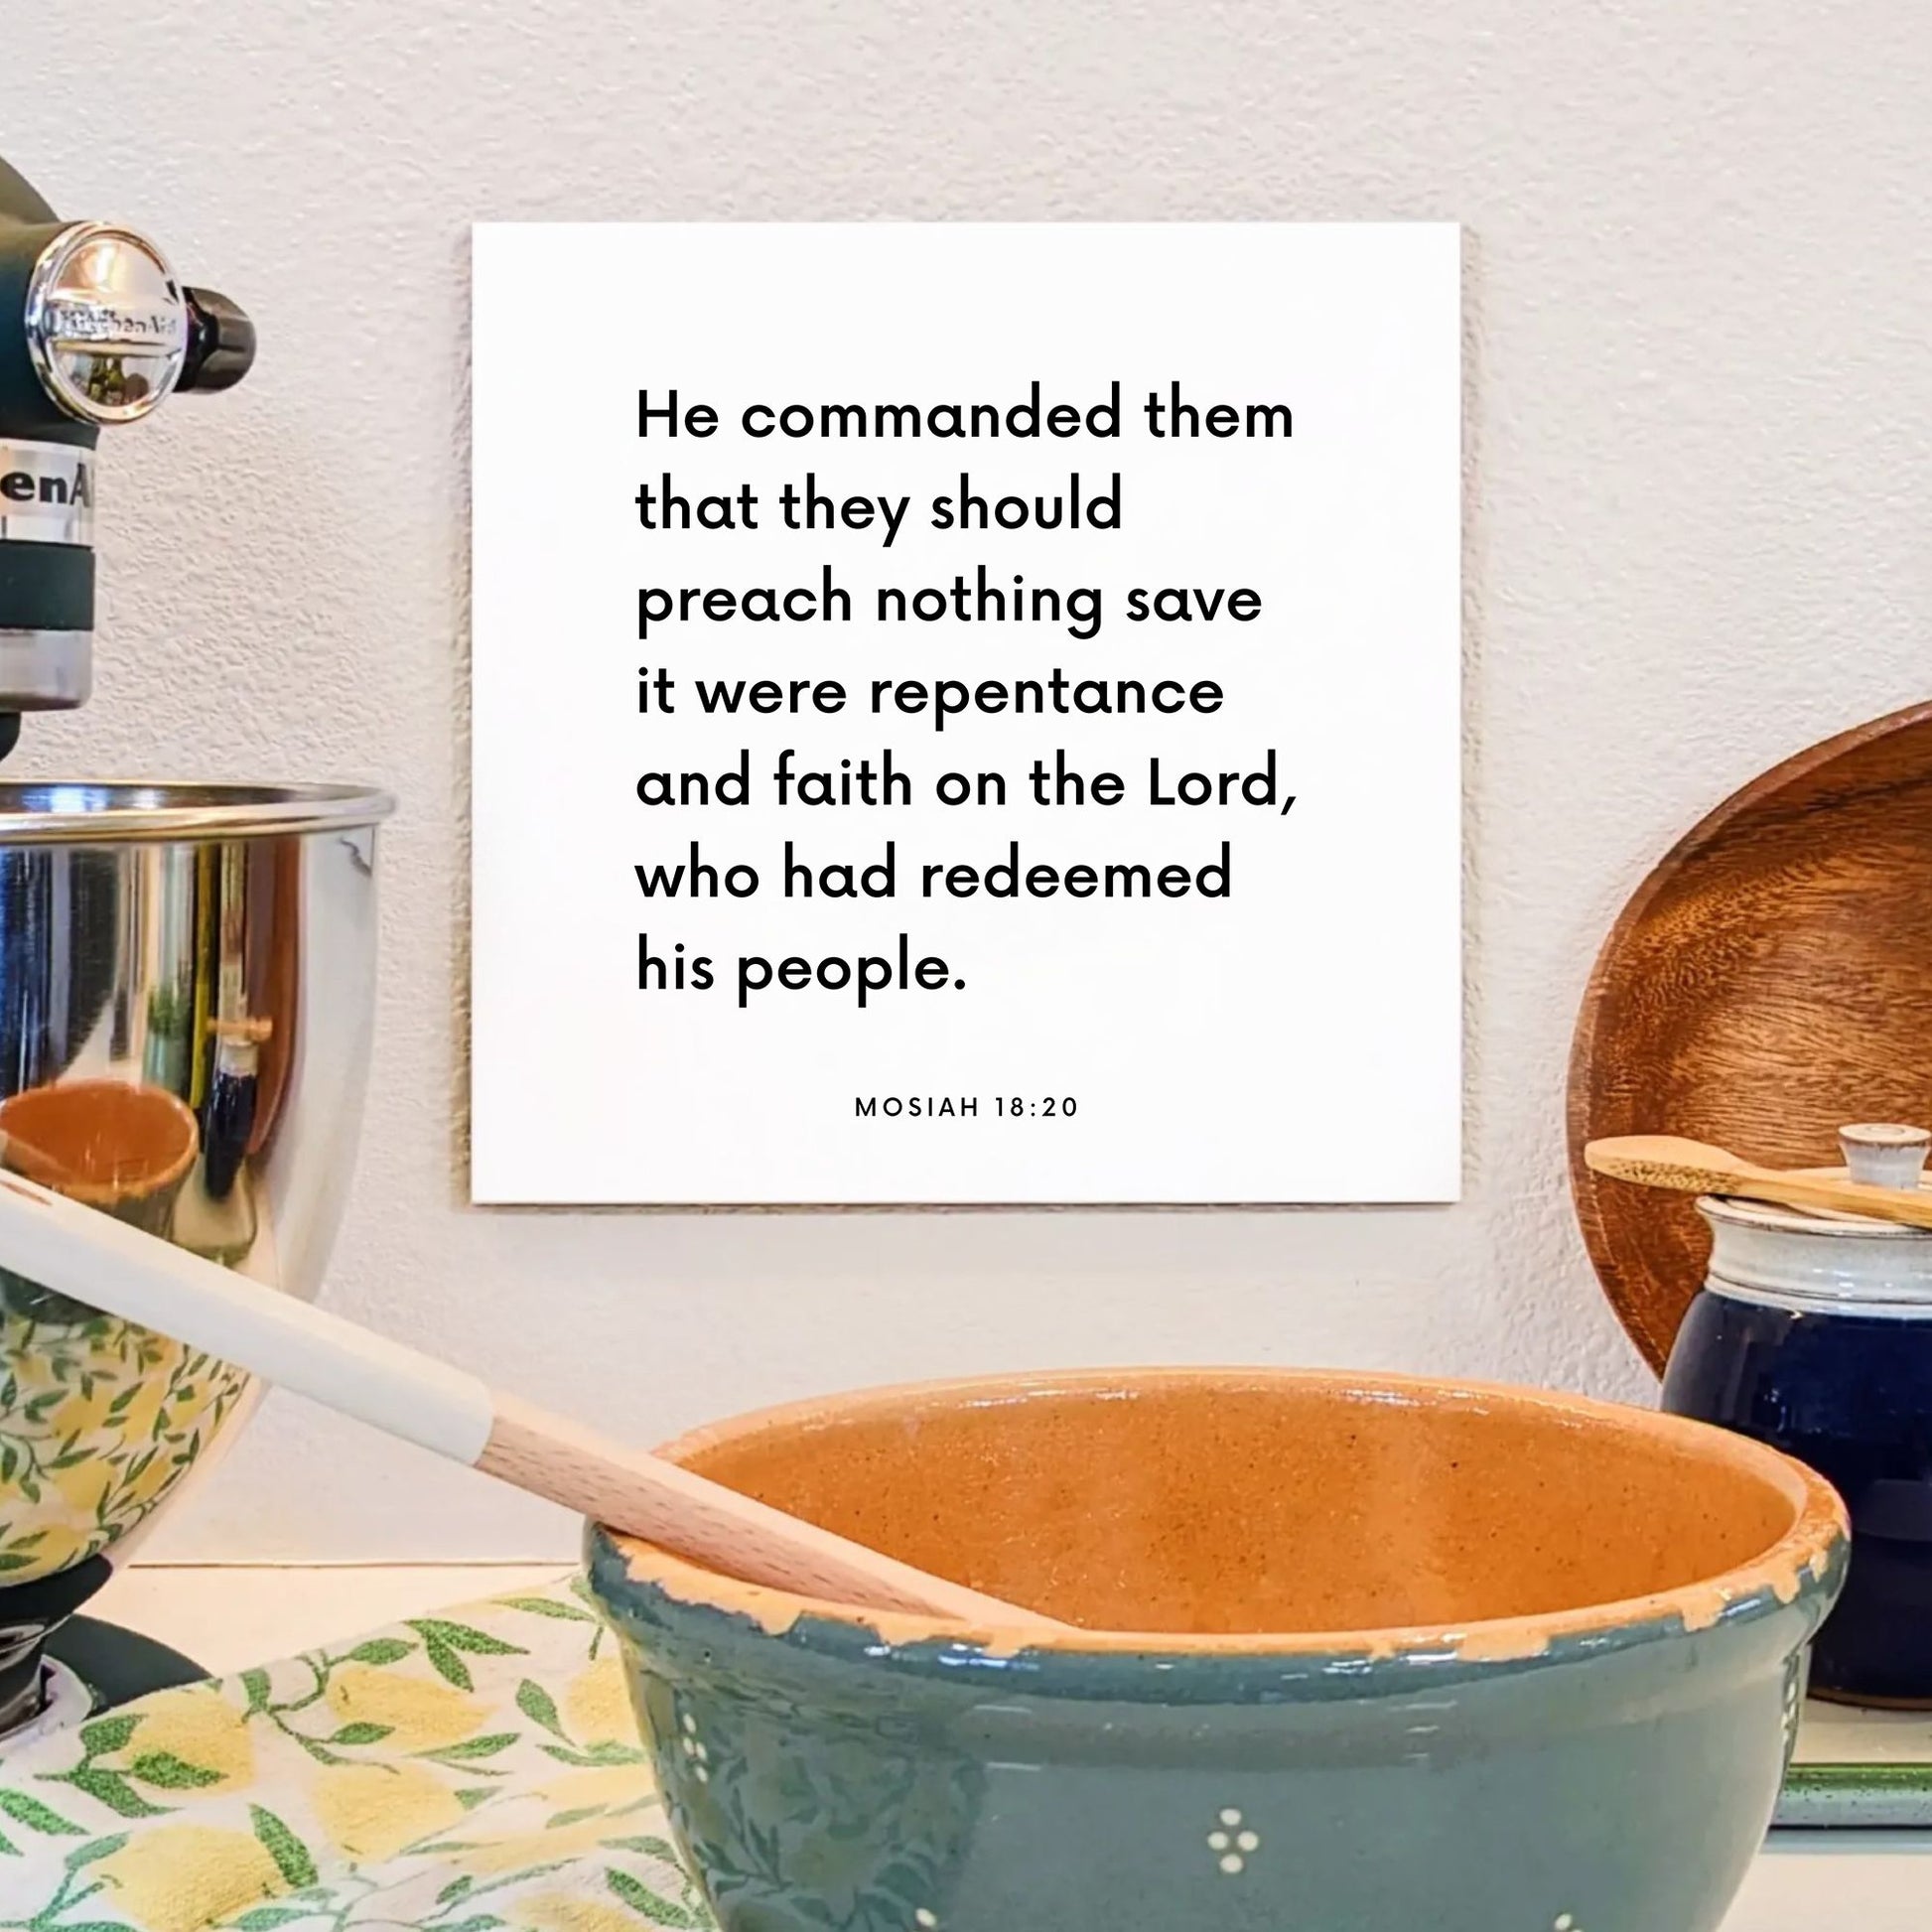 Kitchen mouting of the scripture tile for Mosiah 18:20 - "They should preach nothing save it were repentance and faith"